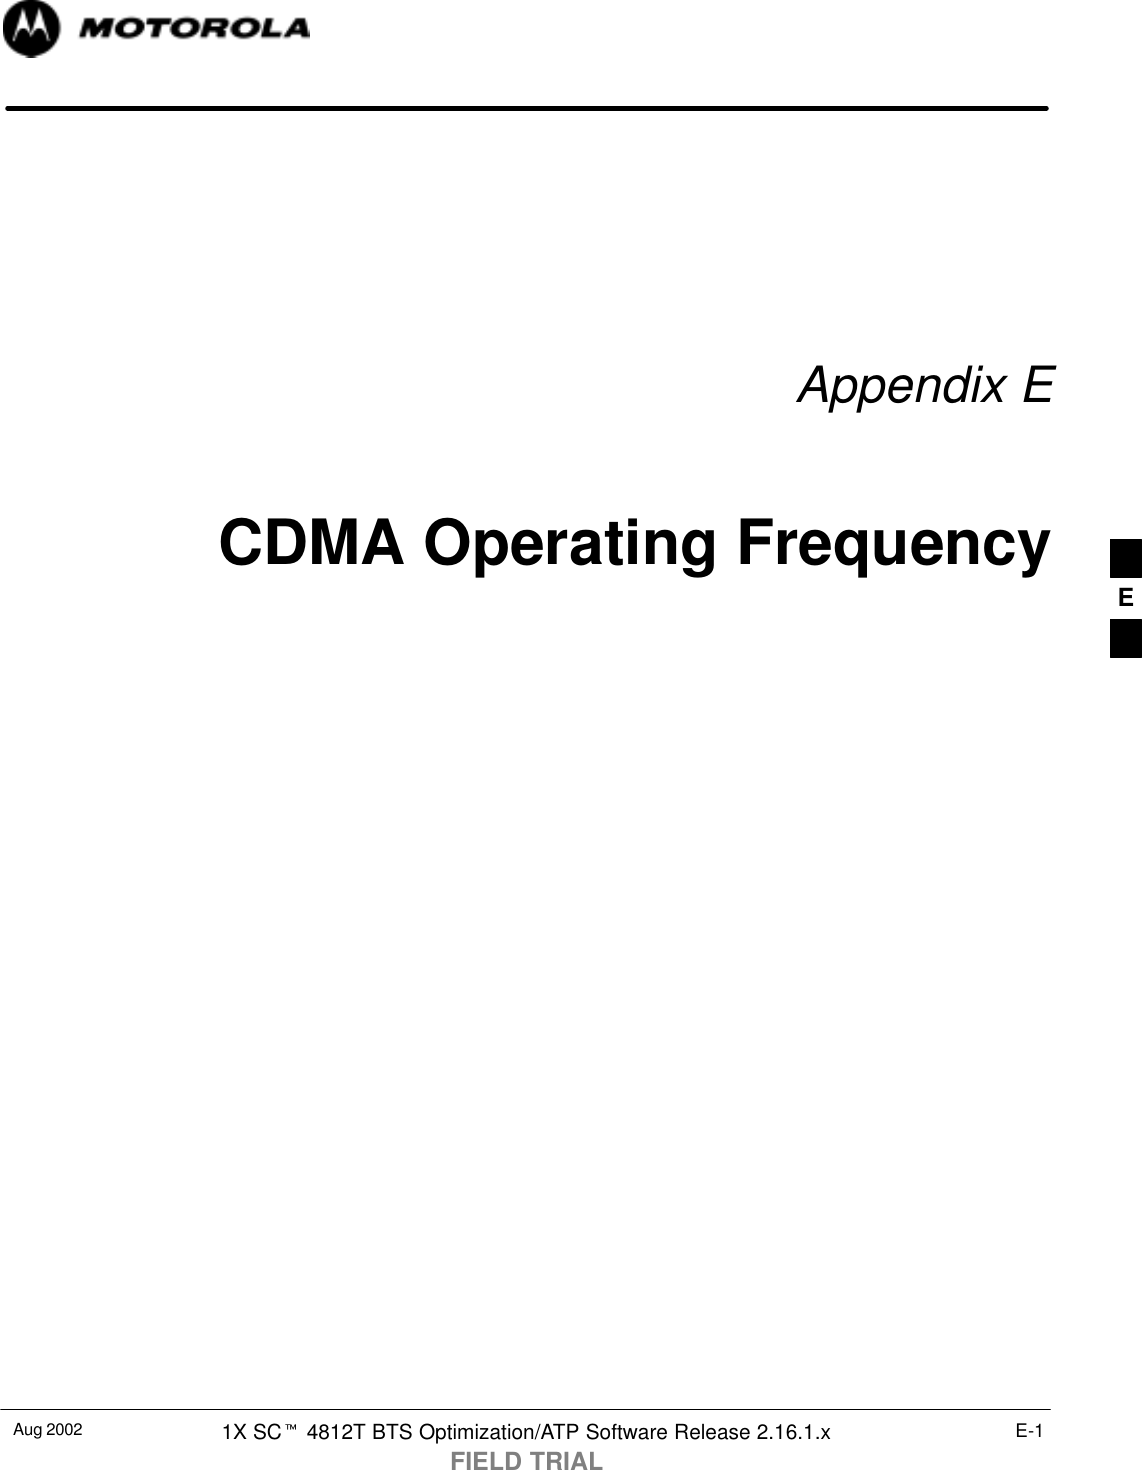 Aug 2002 1X SCt 4812T BTS Optimization/ATP Software Release 2.16.1.xFIELD TRIALE-1Appendix ECDMA Operating Frequency E